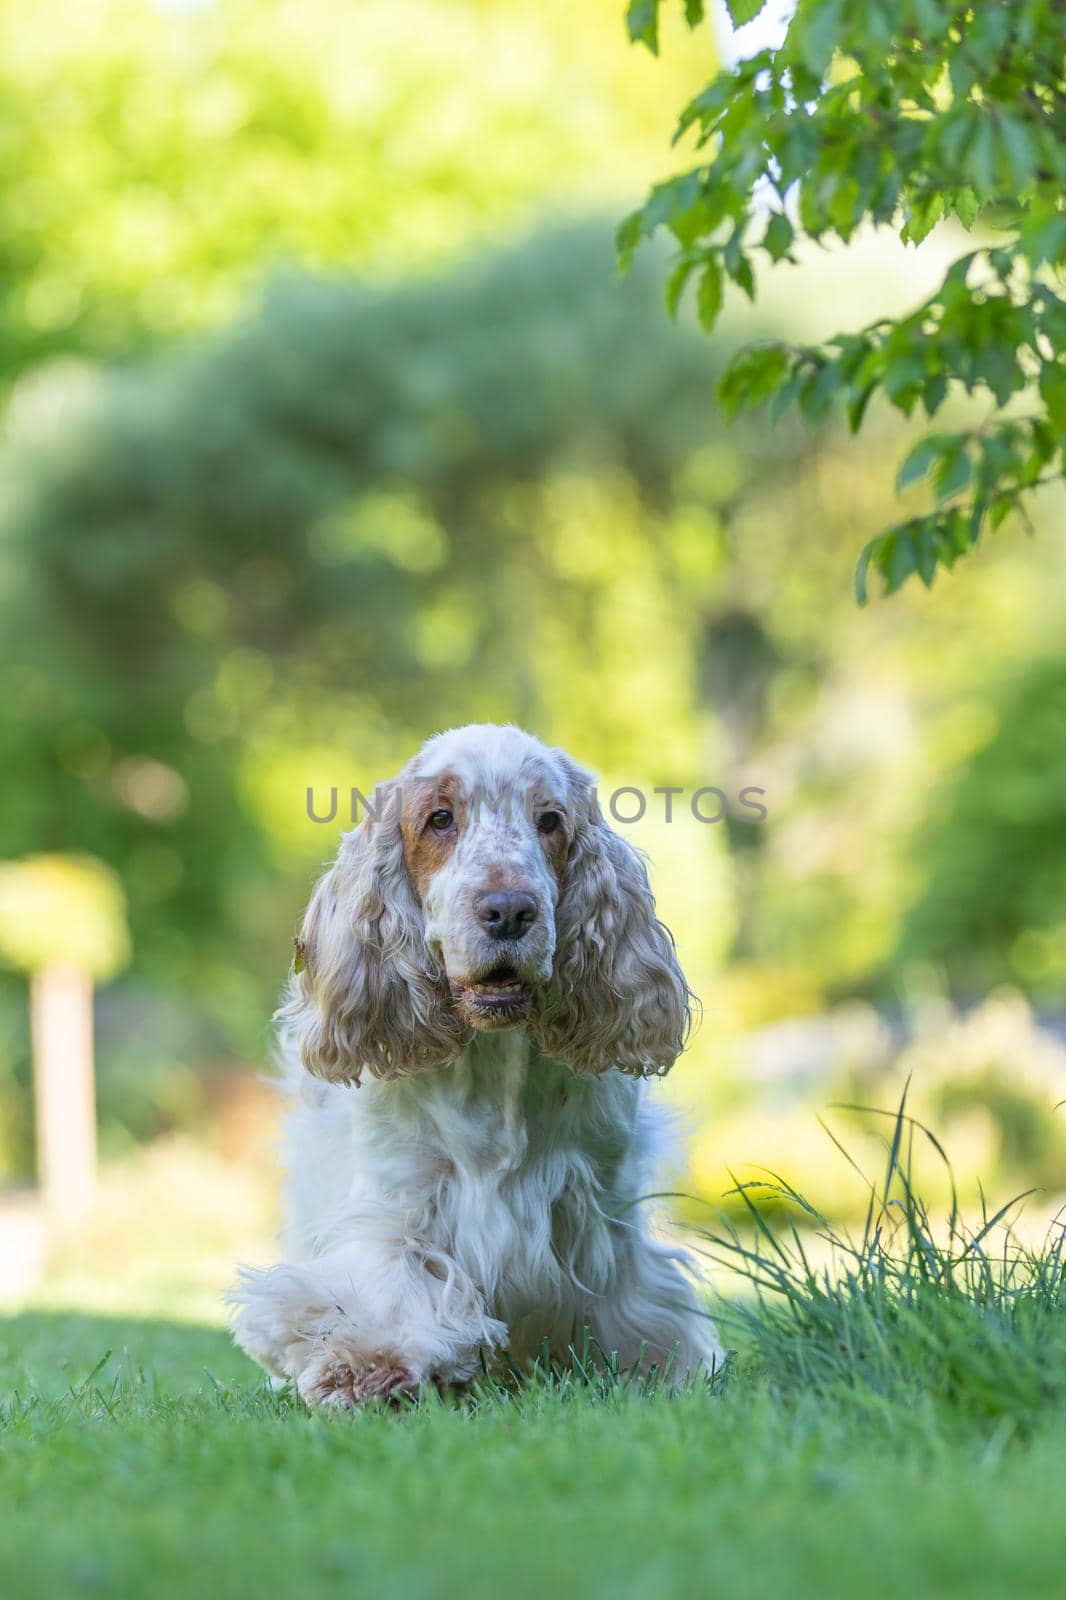 Cocker Spaniel Dog Breed Is In The Grass by artush